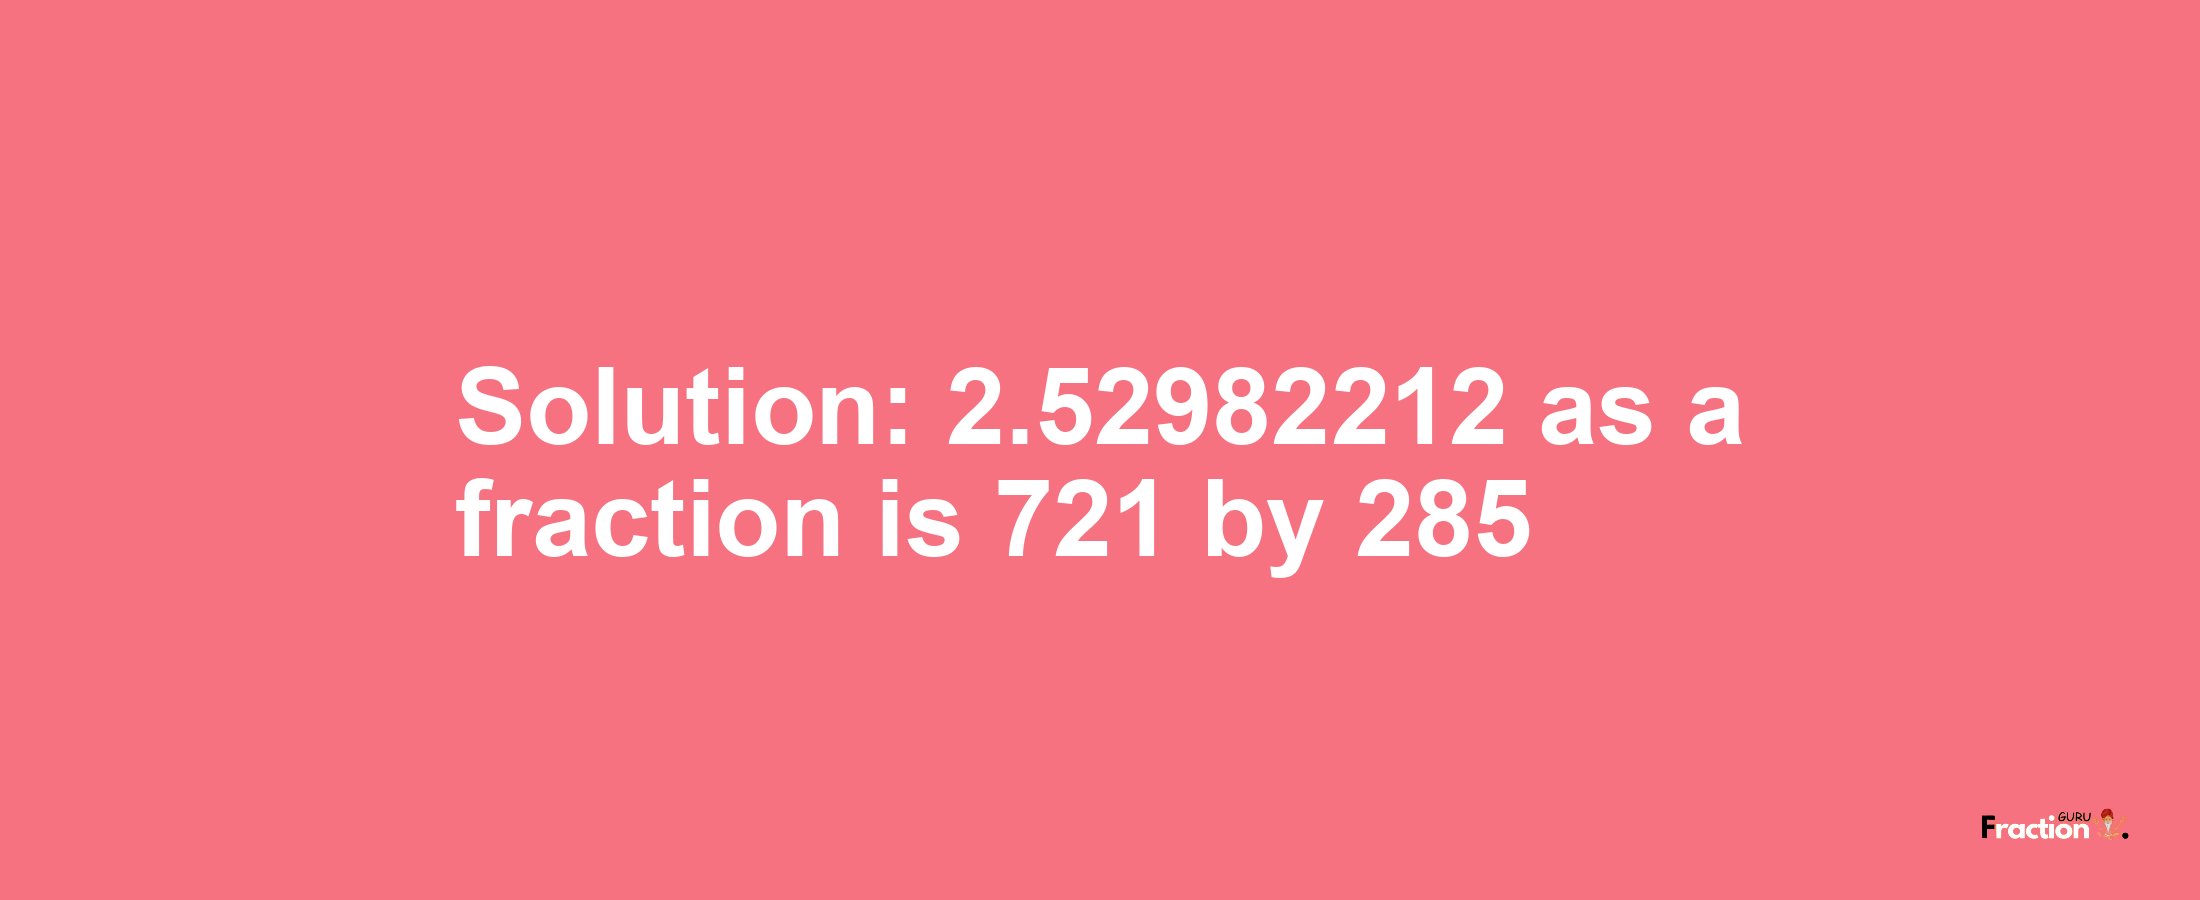 Solution:2.52982212 as a fraction is 721/285